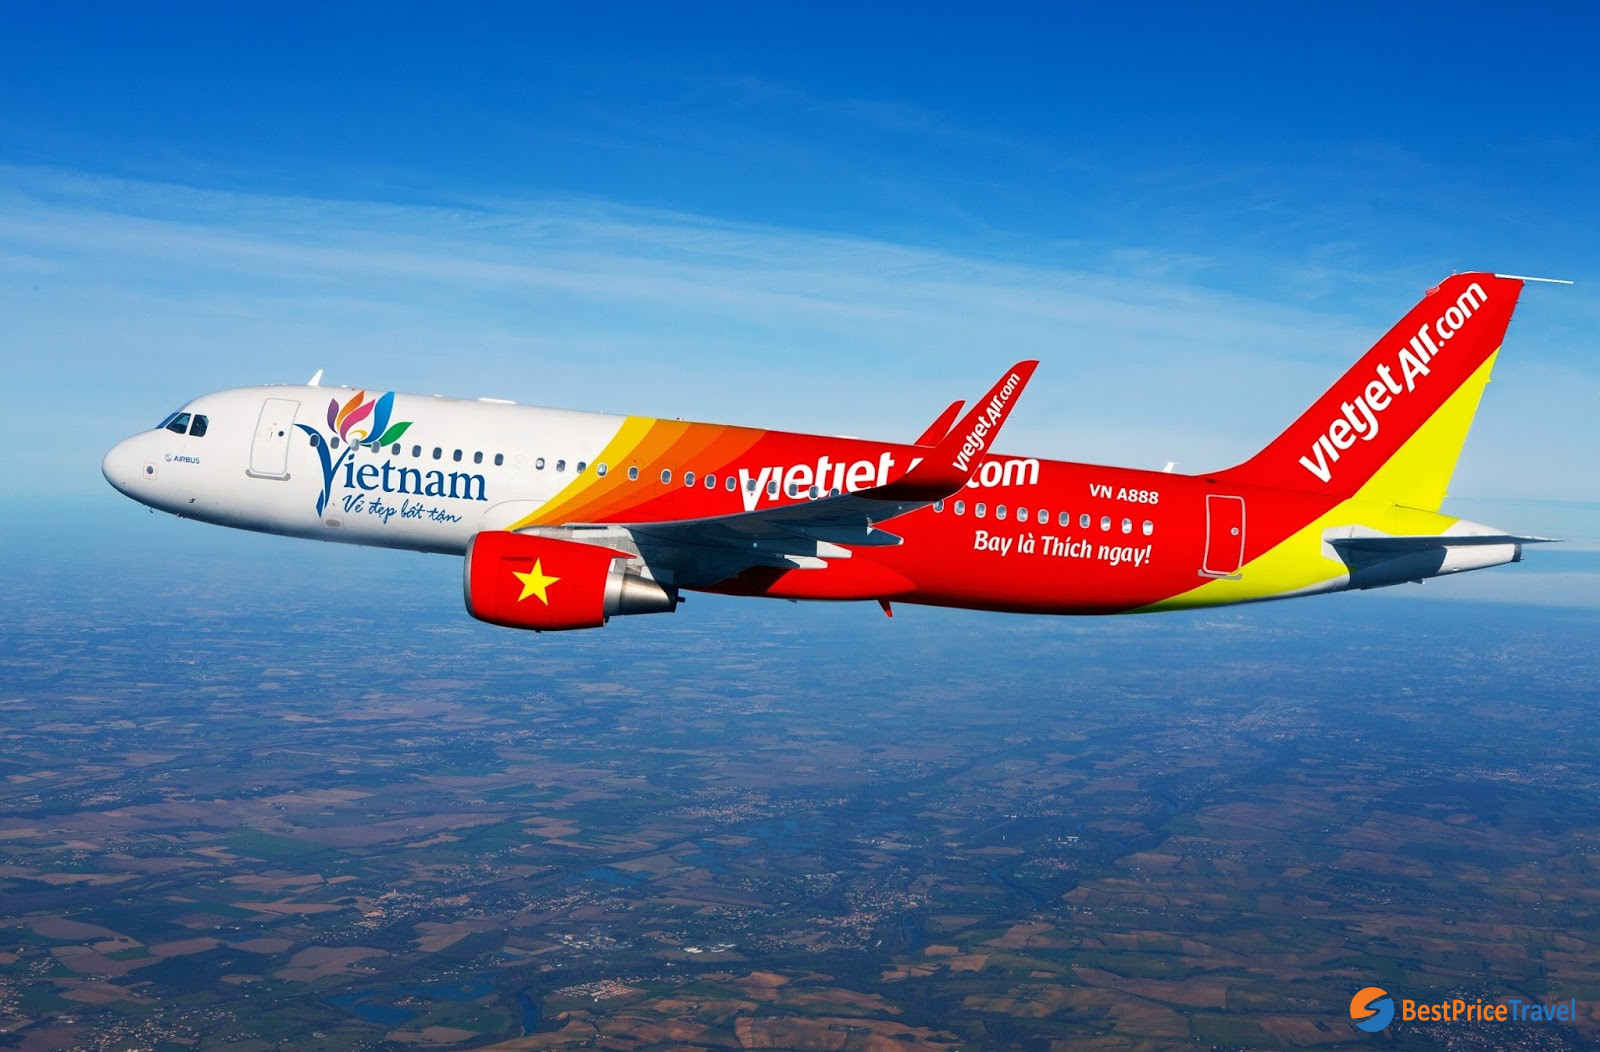 VietJet Air offers numerous low-priced flight tickets to Thailand